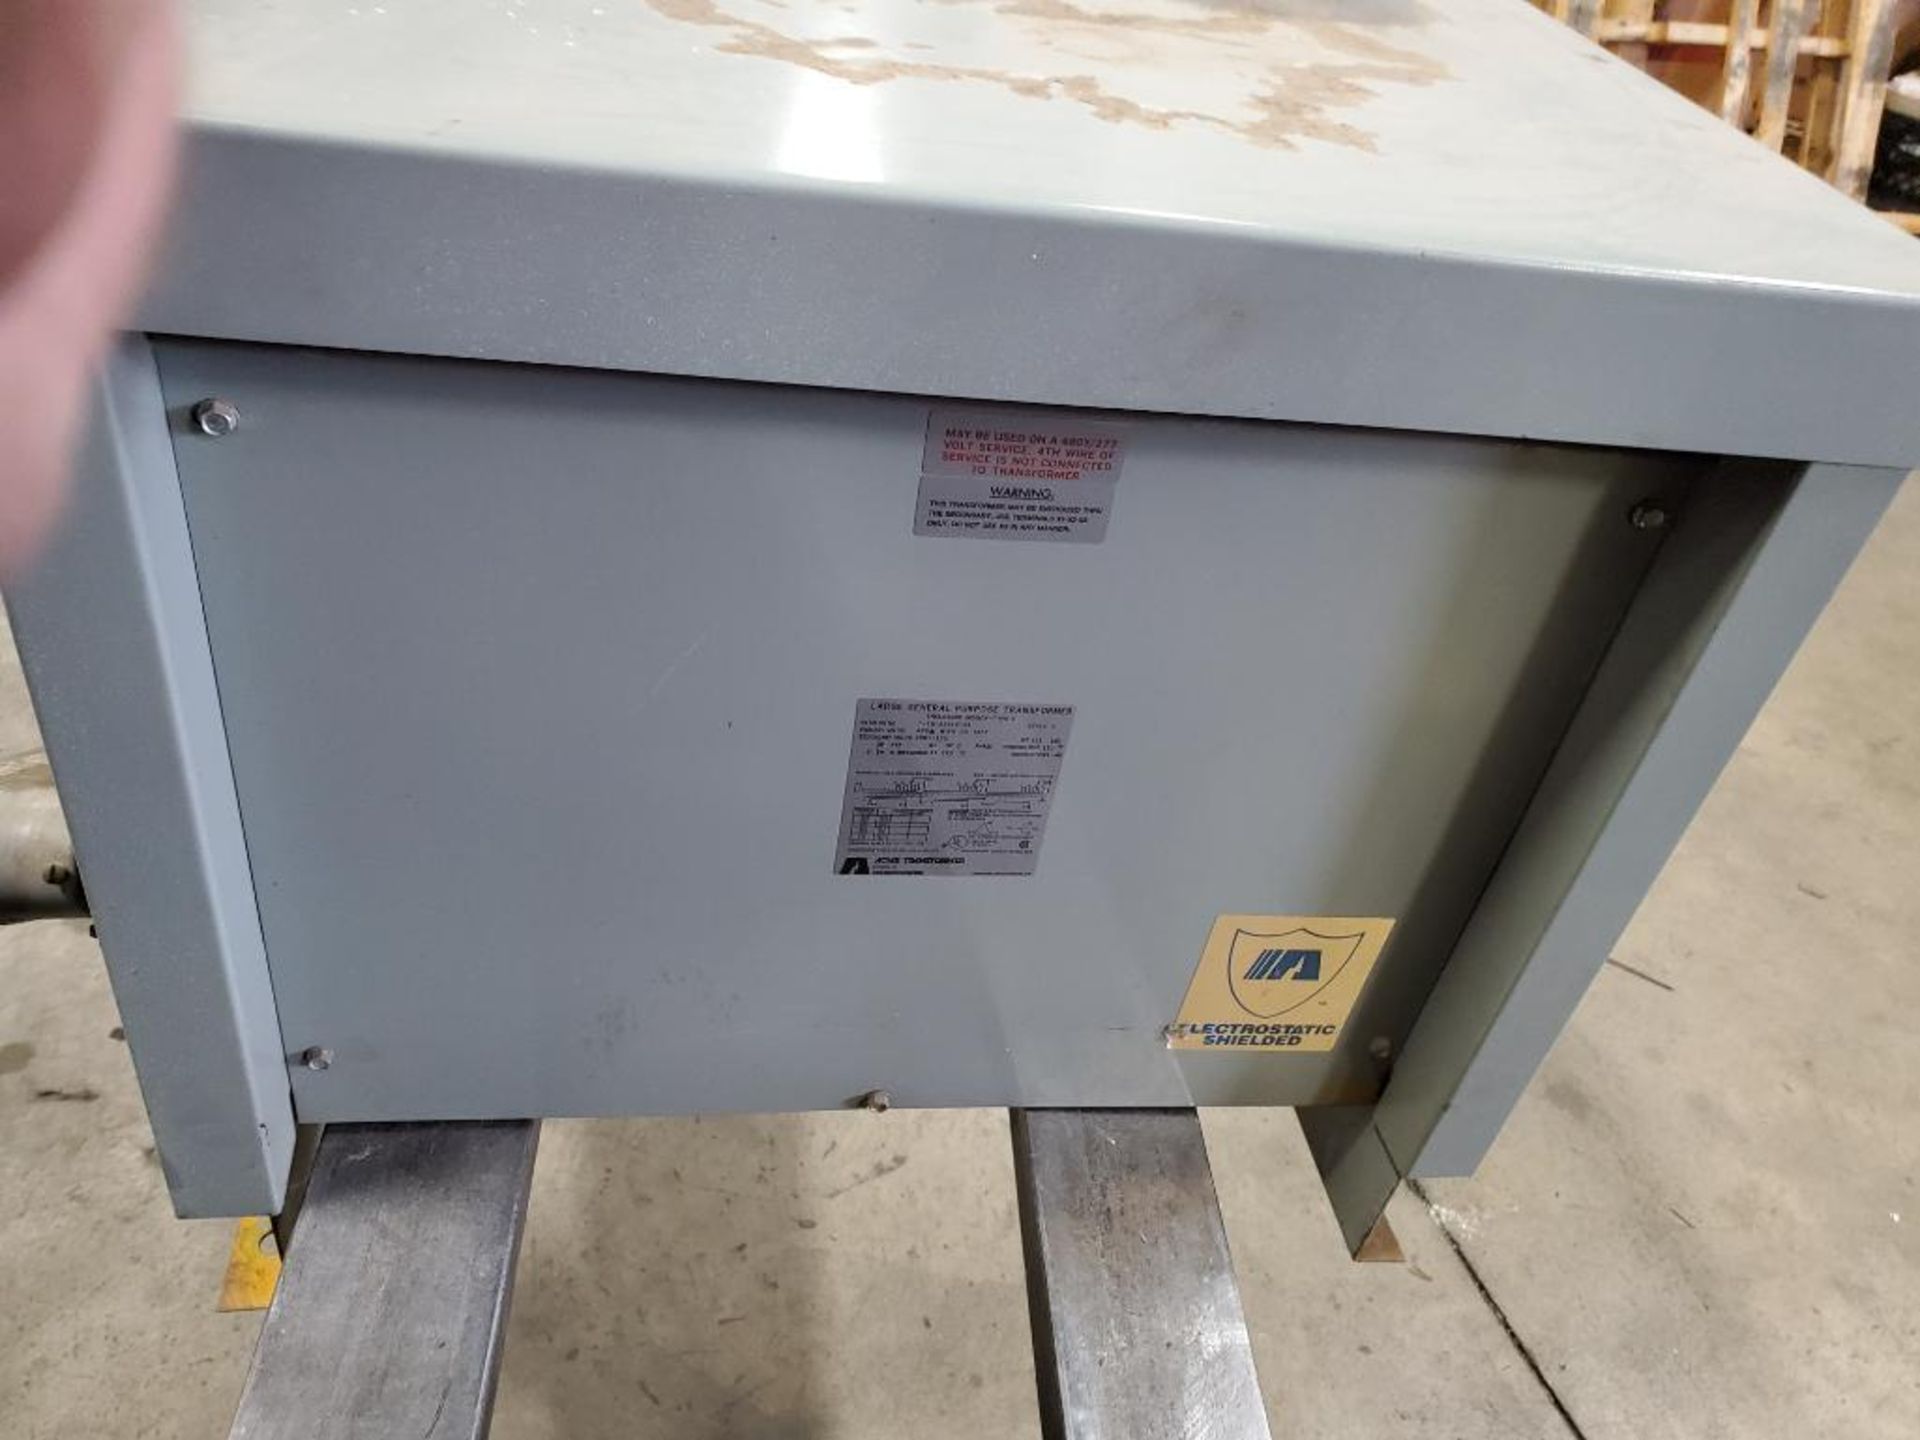 30kVa Acme Transformer. Catalog number T-1A-53312-35. Primary 480v. Secondary 208Y/120. - Image 5 of 11